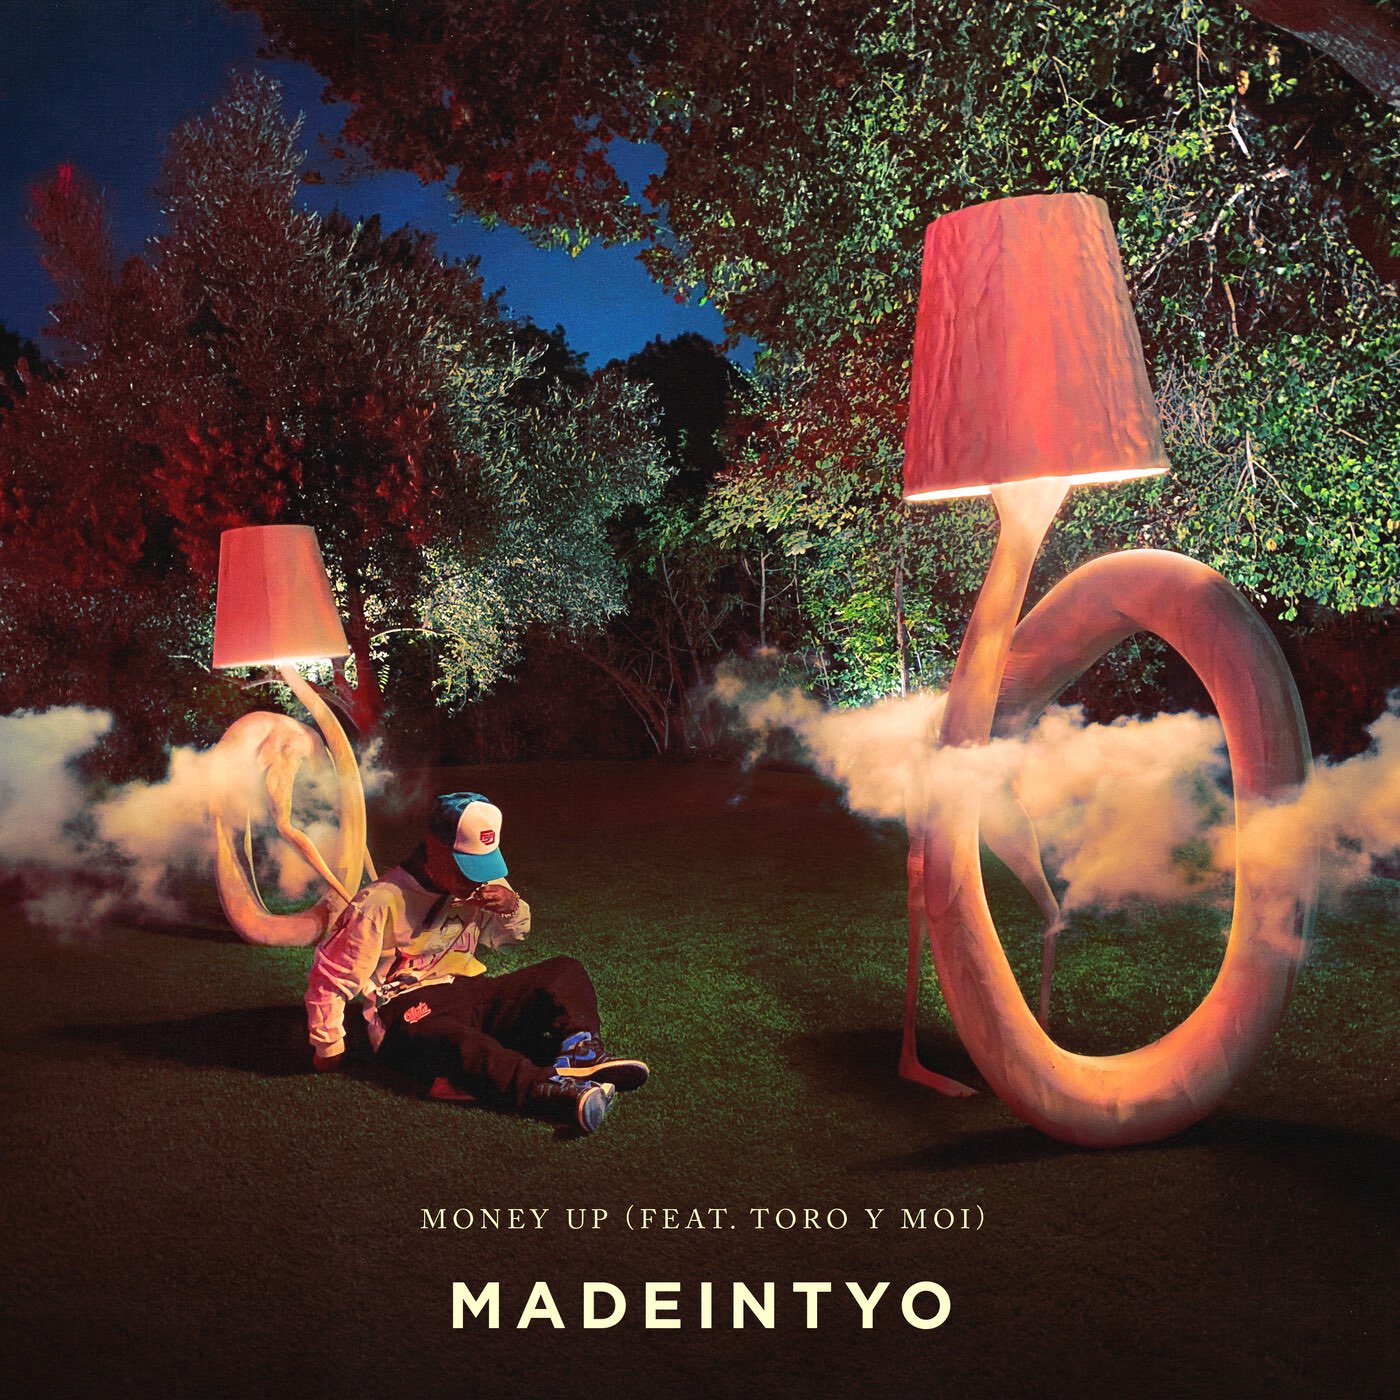 MadeinTYO ft. featuring Toro y Moi Money Up cover artwork